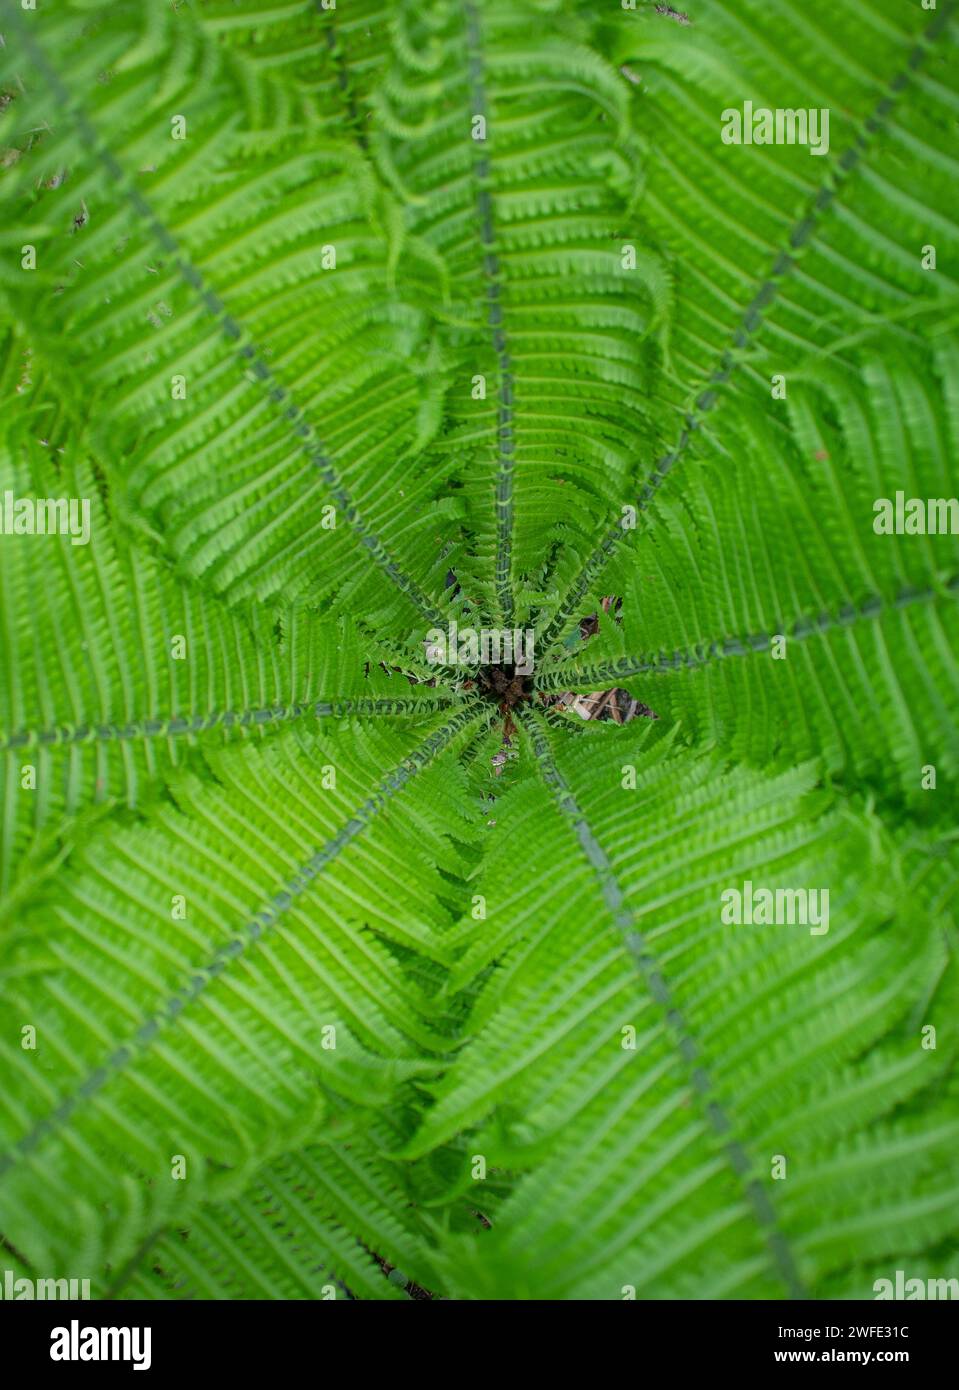 A top view of a wonderful green fern. Green fern texture that can be used as a background. Close up details of an inside of a fern. Ferns background a Stock Photo